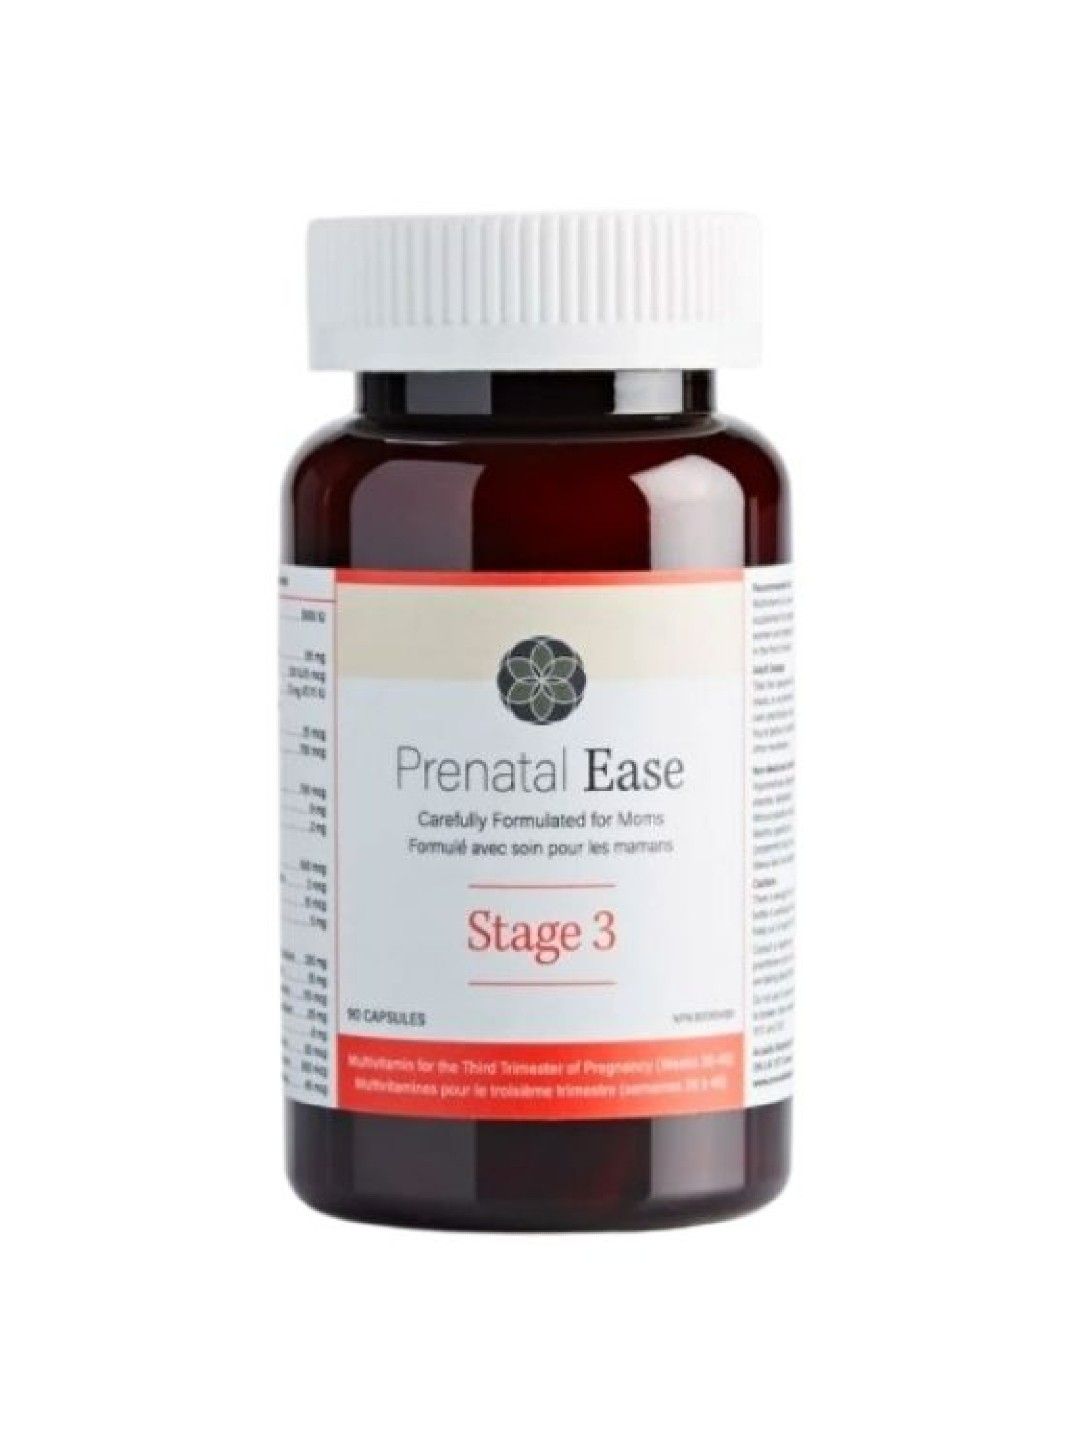 Prenatal Ease Stage 3 - 3rd Trimester (90 capsules)